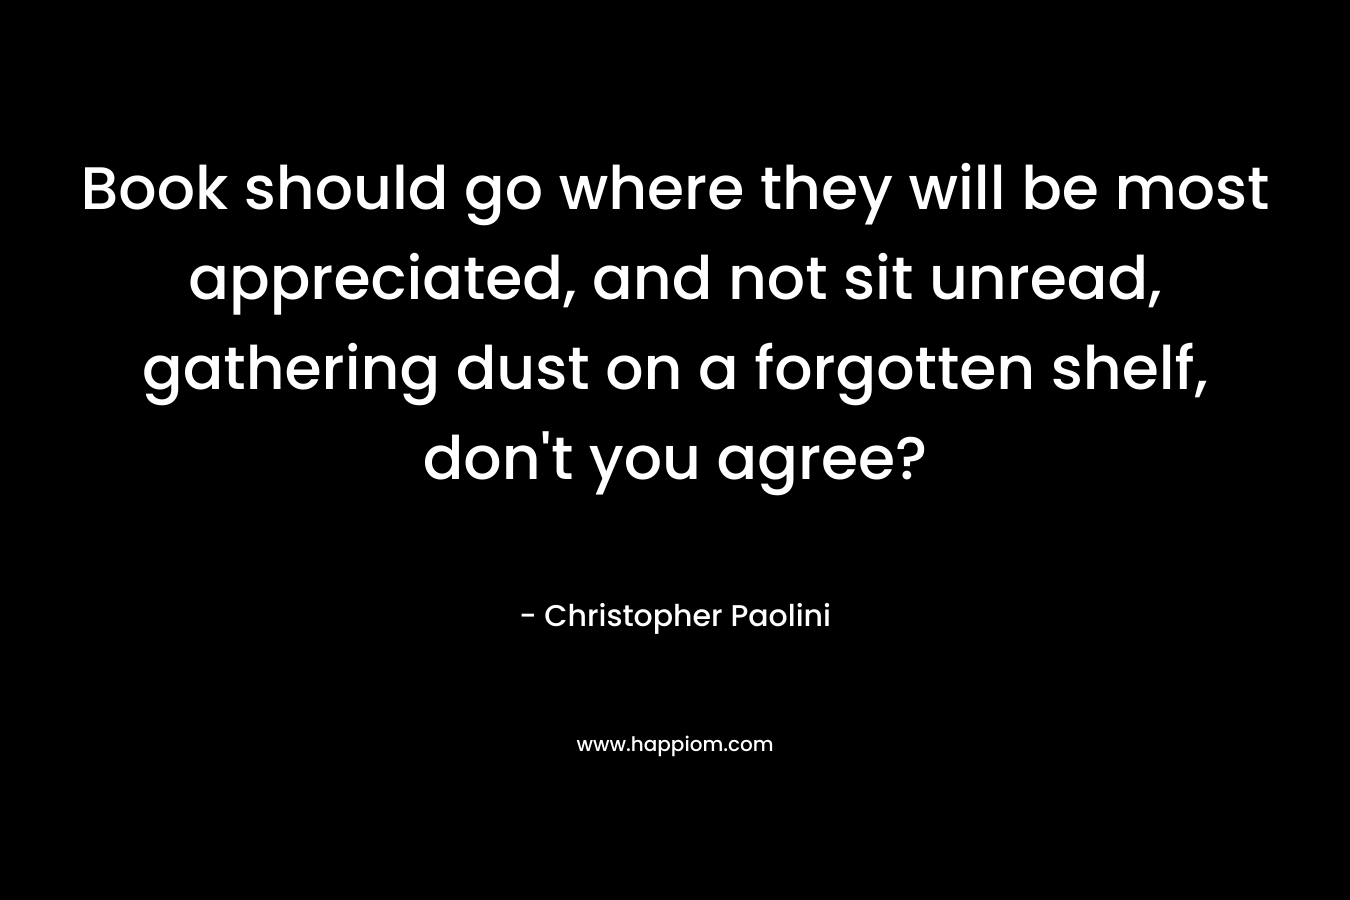 Book should go where they will be most appreciated, and not sit unread, gathering dust on a forgotten shelf, don’t you agree? – Christopher Paolini